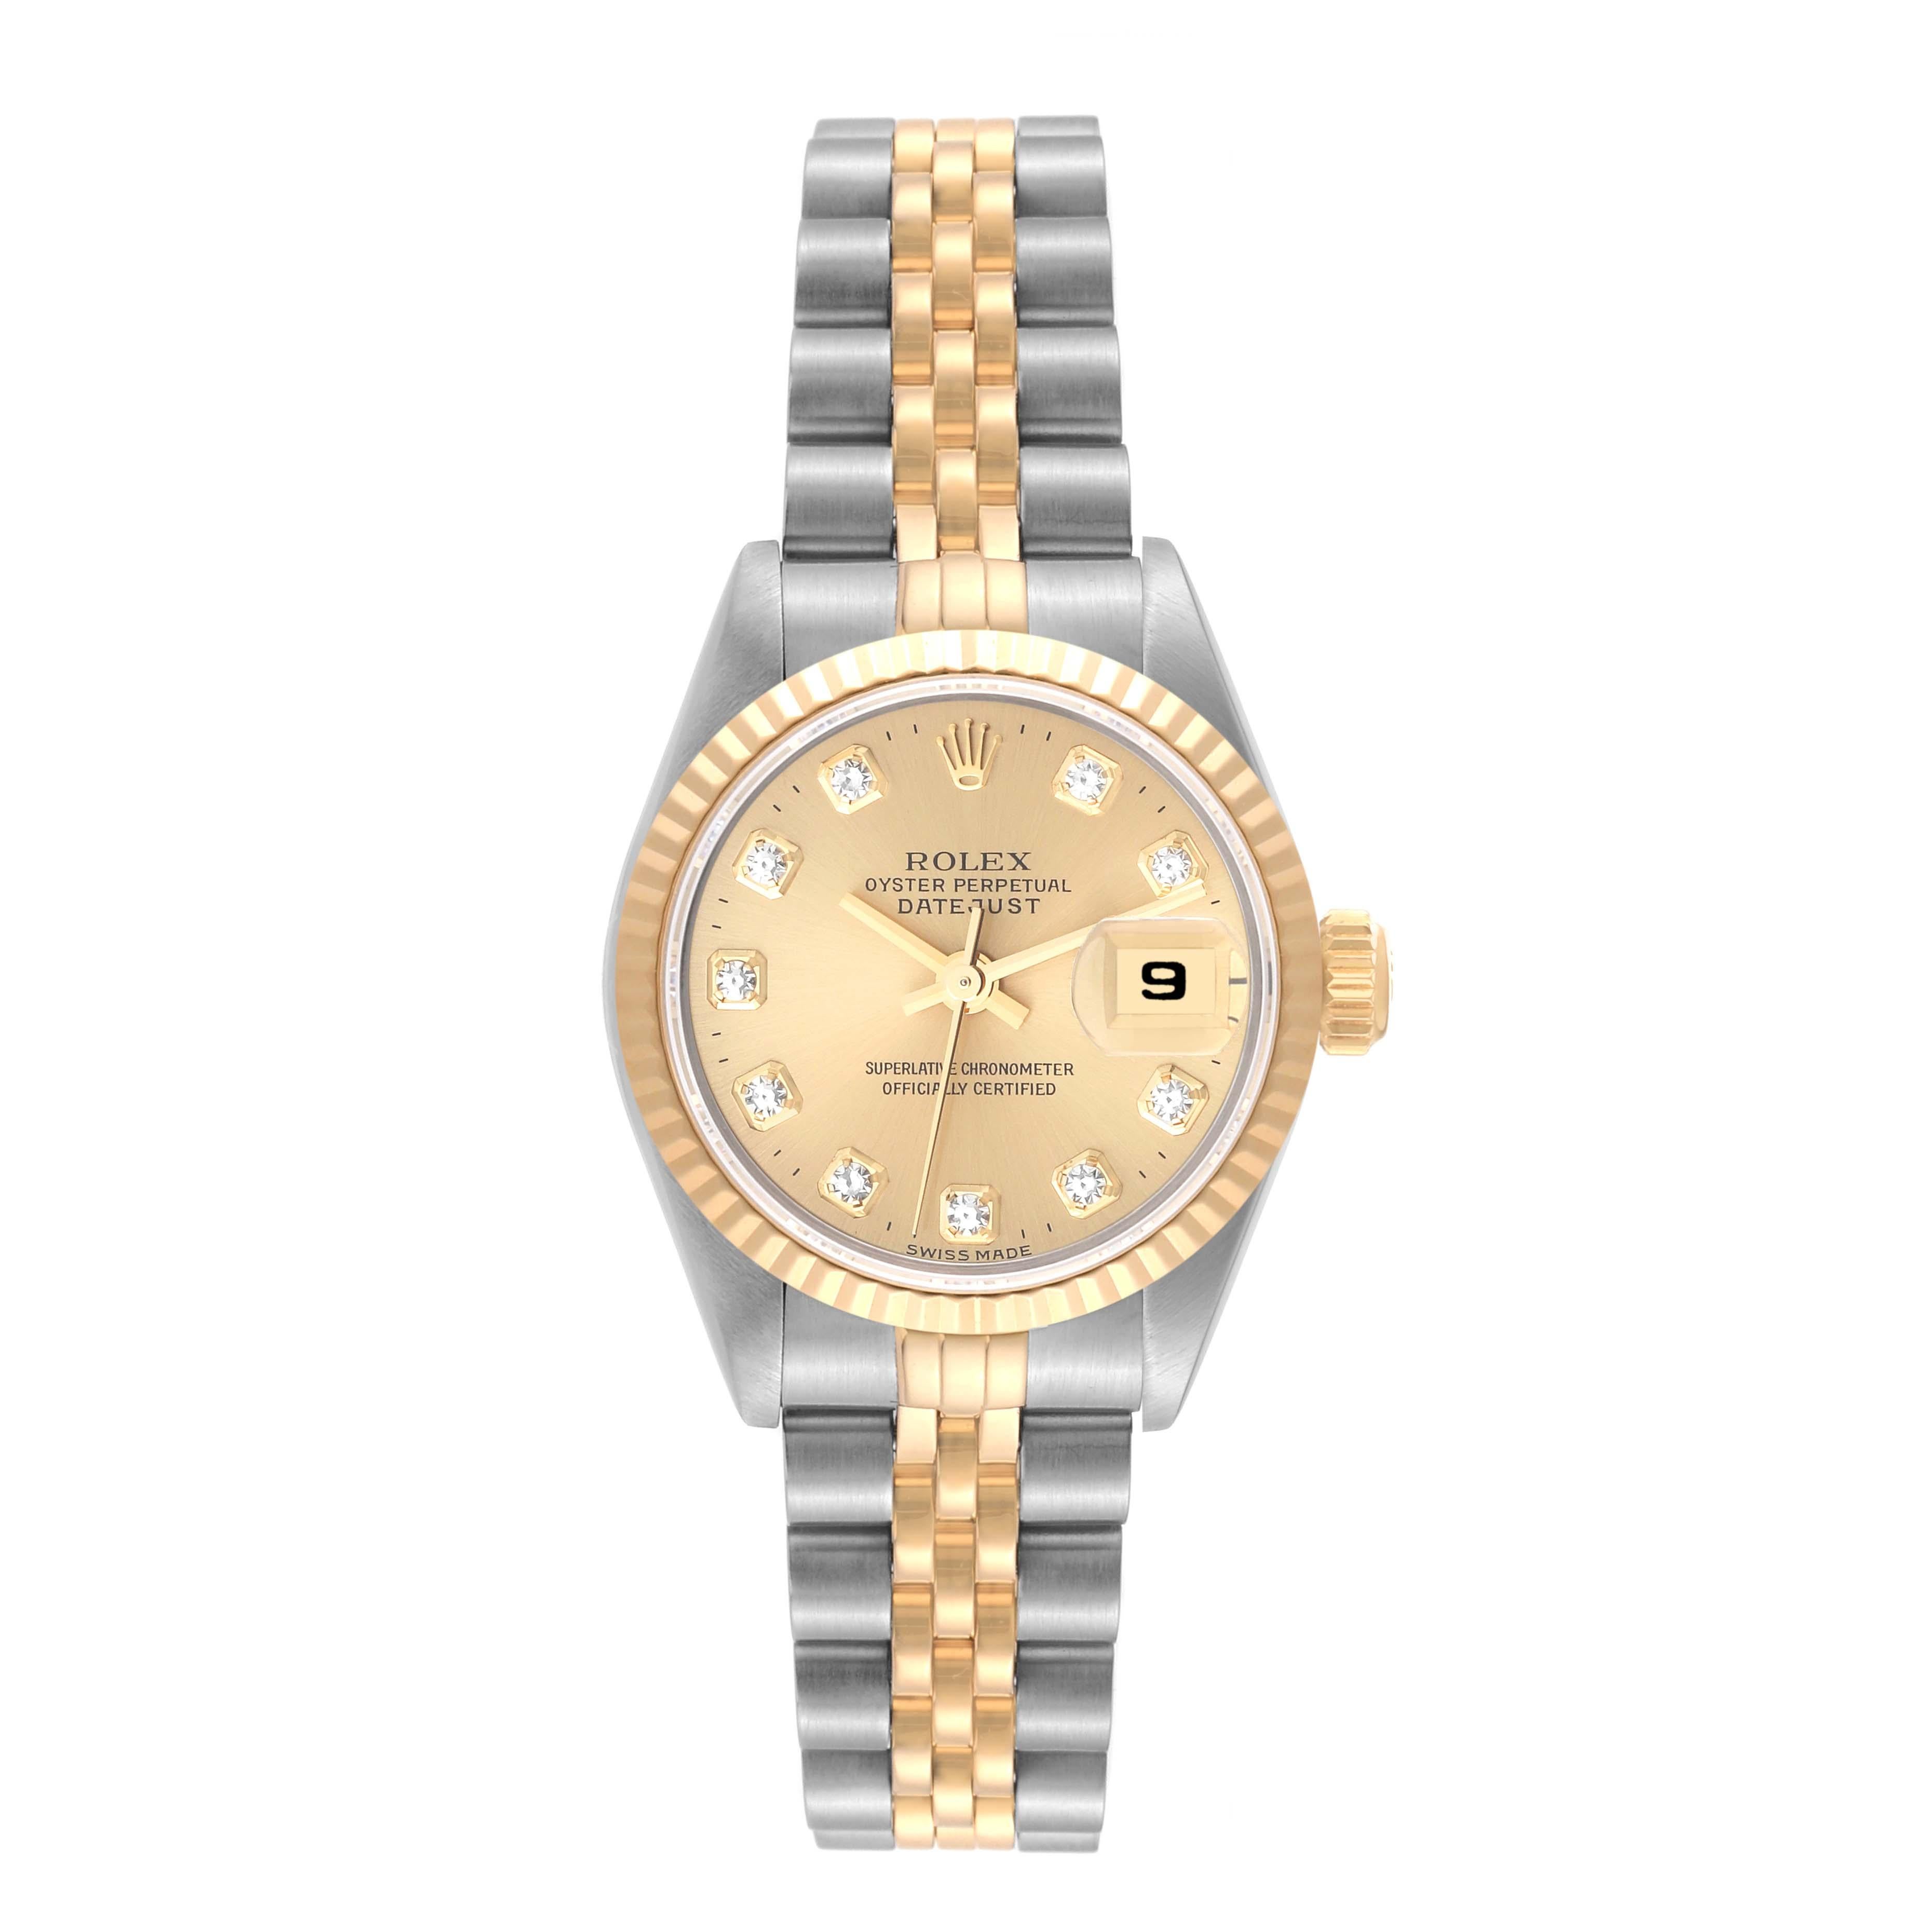 Rolex Datejust Diamond Dial Steel Yellow Gold Ladies Watch 69173. Officially certified chronometer automatic self-winding movement. Stainless steel oyster case 26.0 mm in diameter. Rolex logo on the crown. 18k yellow gold fluted bezel. Scratch